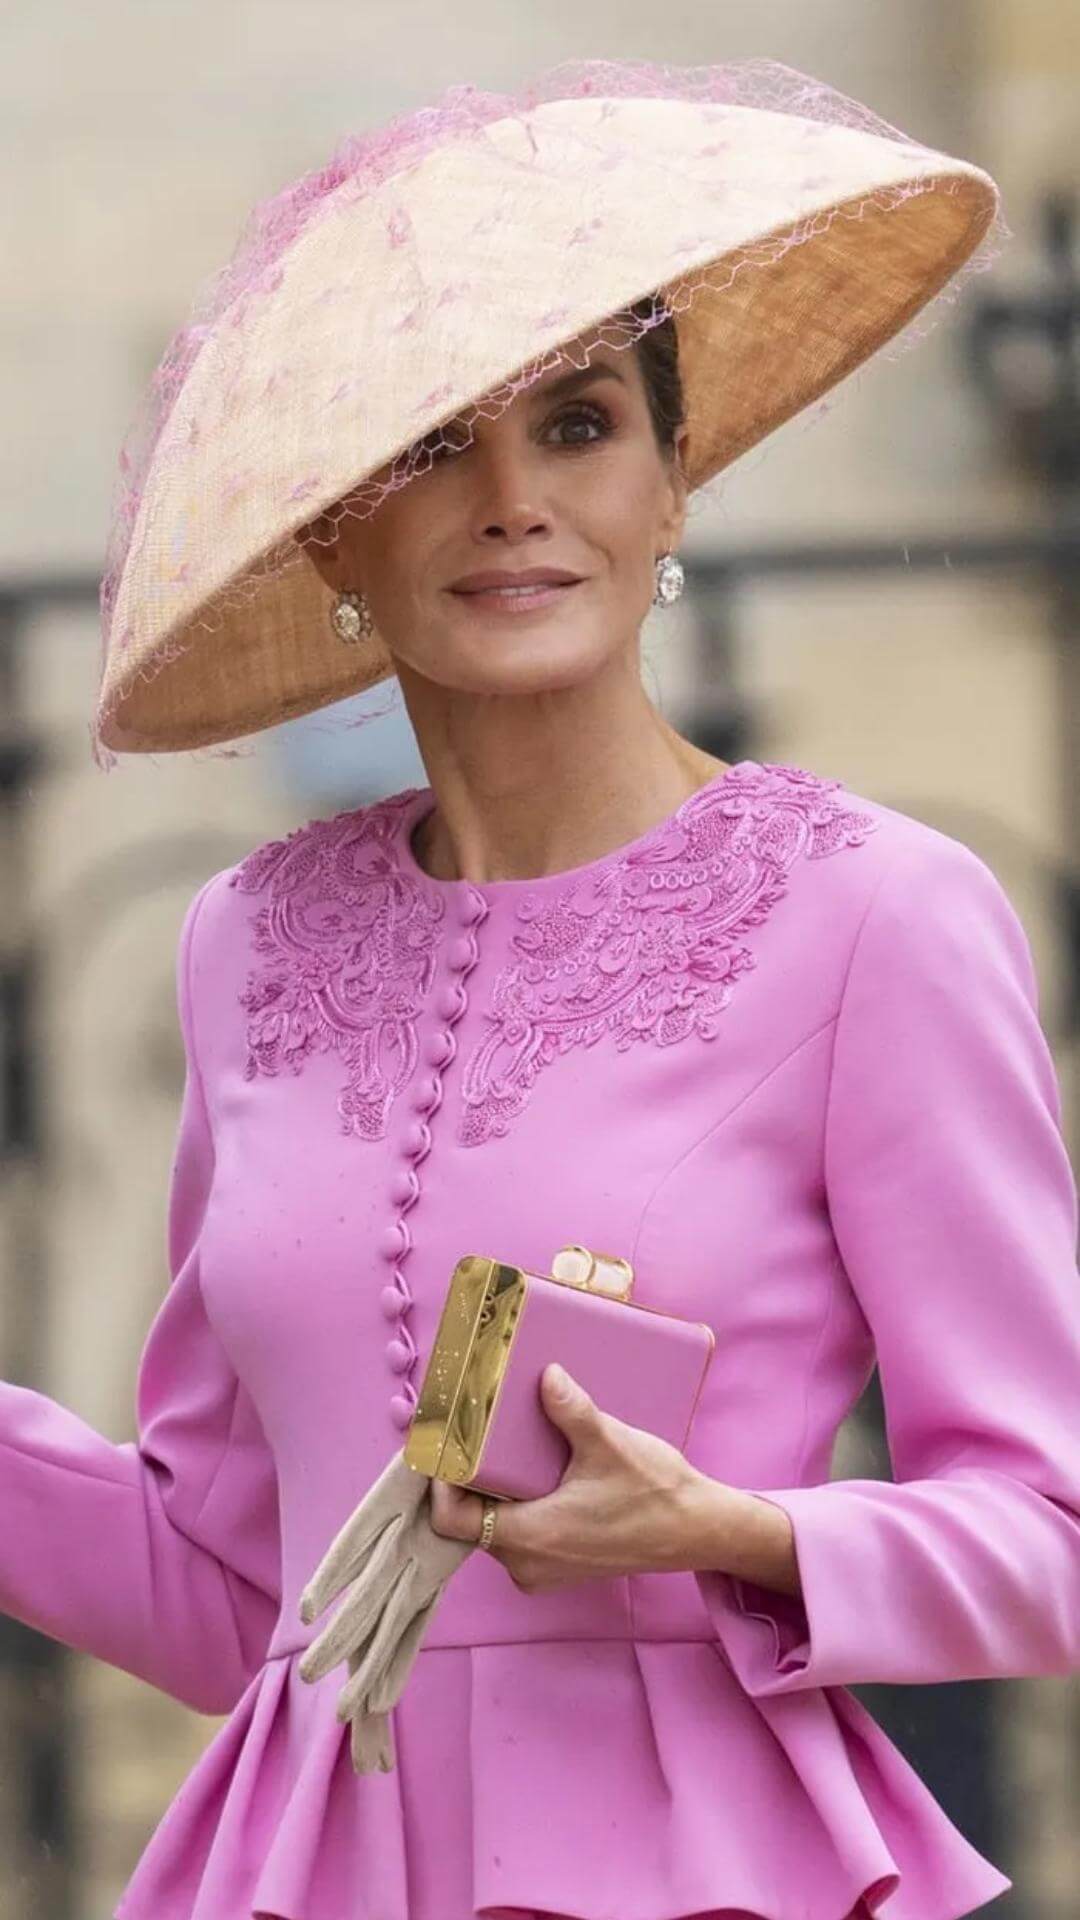 Queen Letizia of Spain looks stunning in pink as she arrives at Westminster Abbey for the Coronation